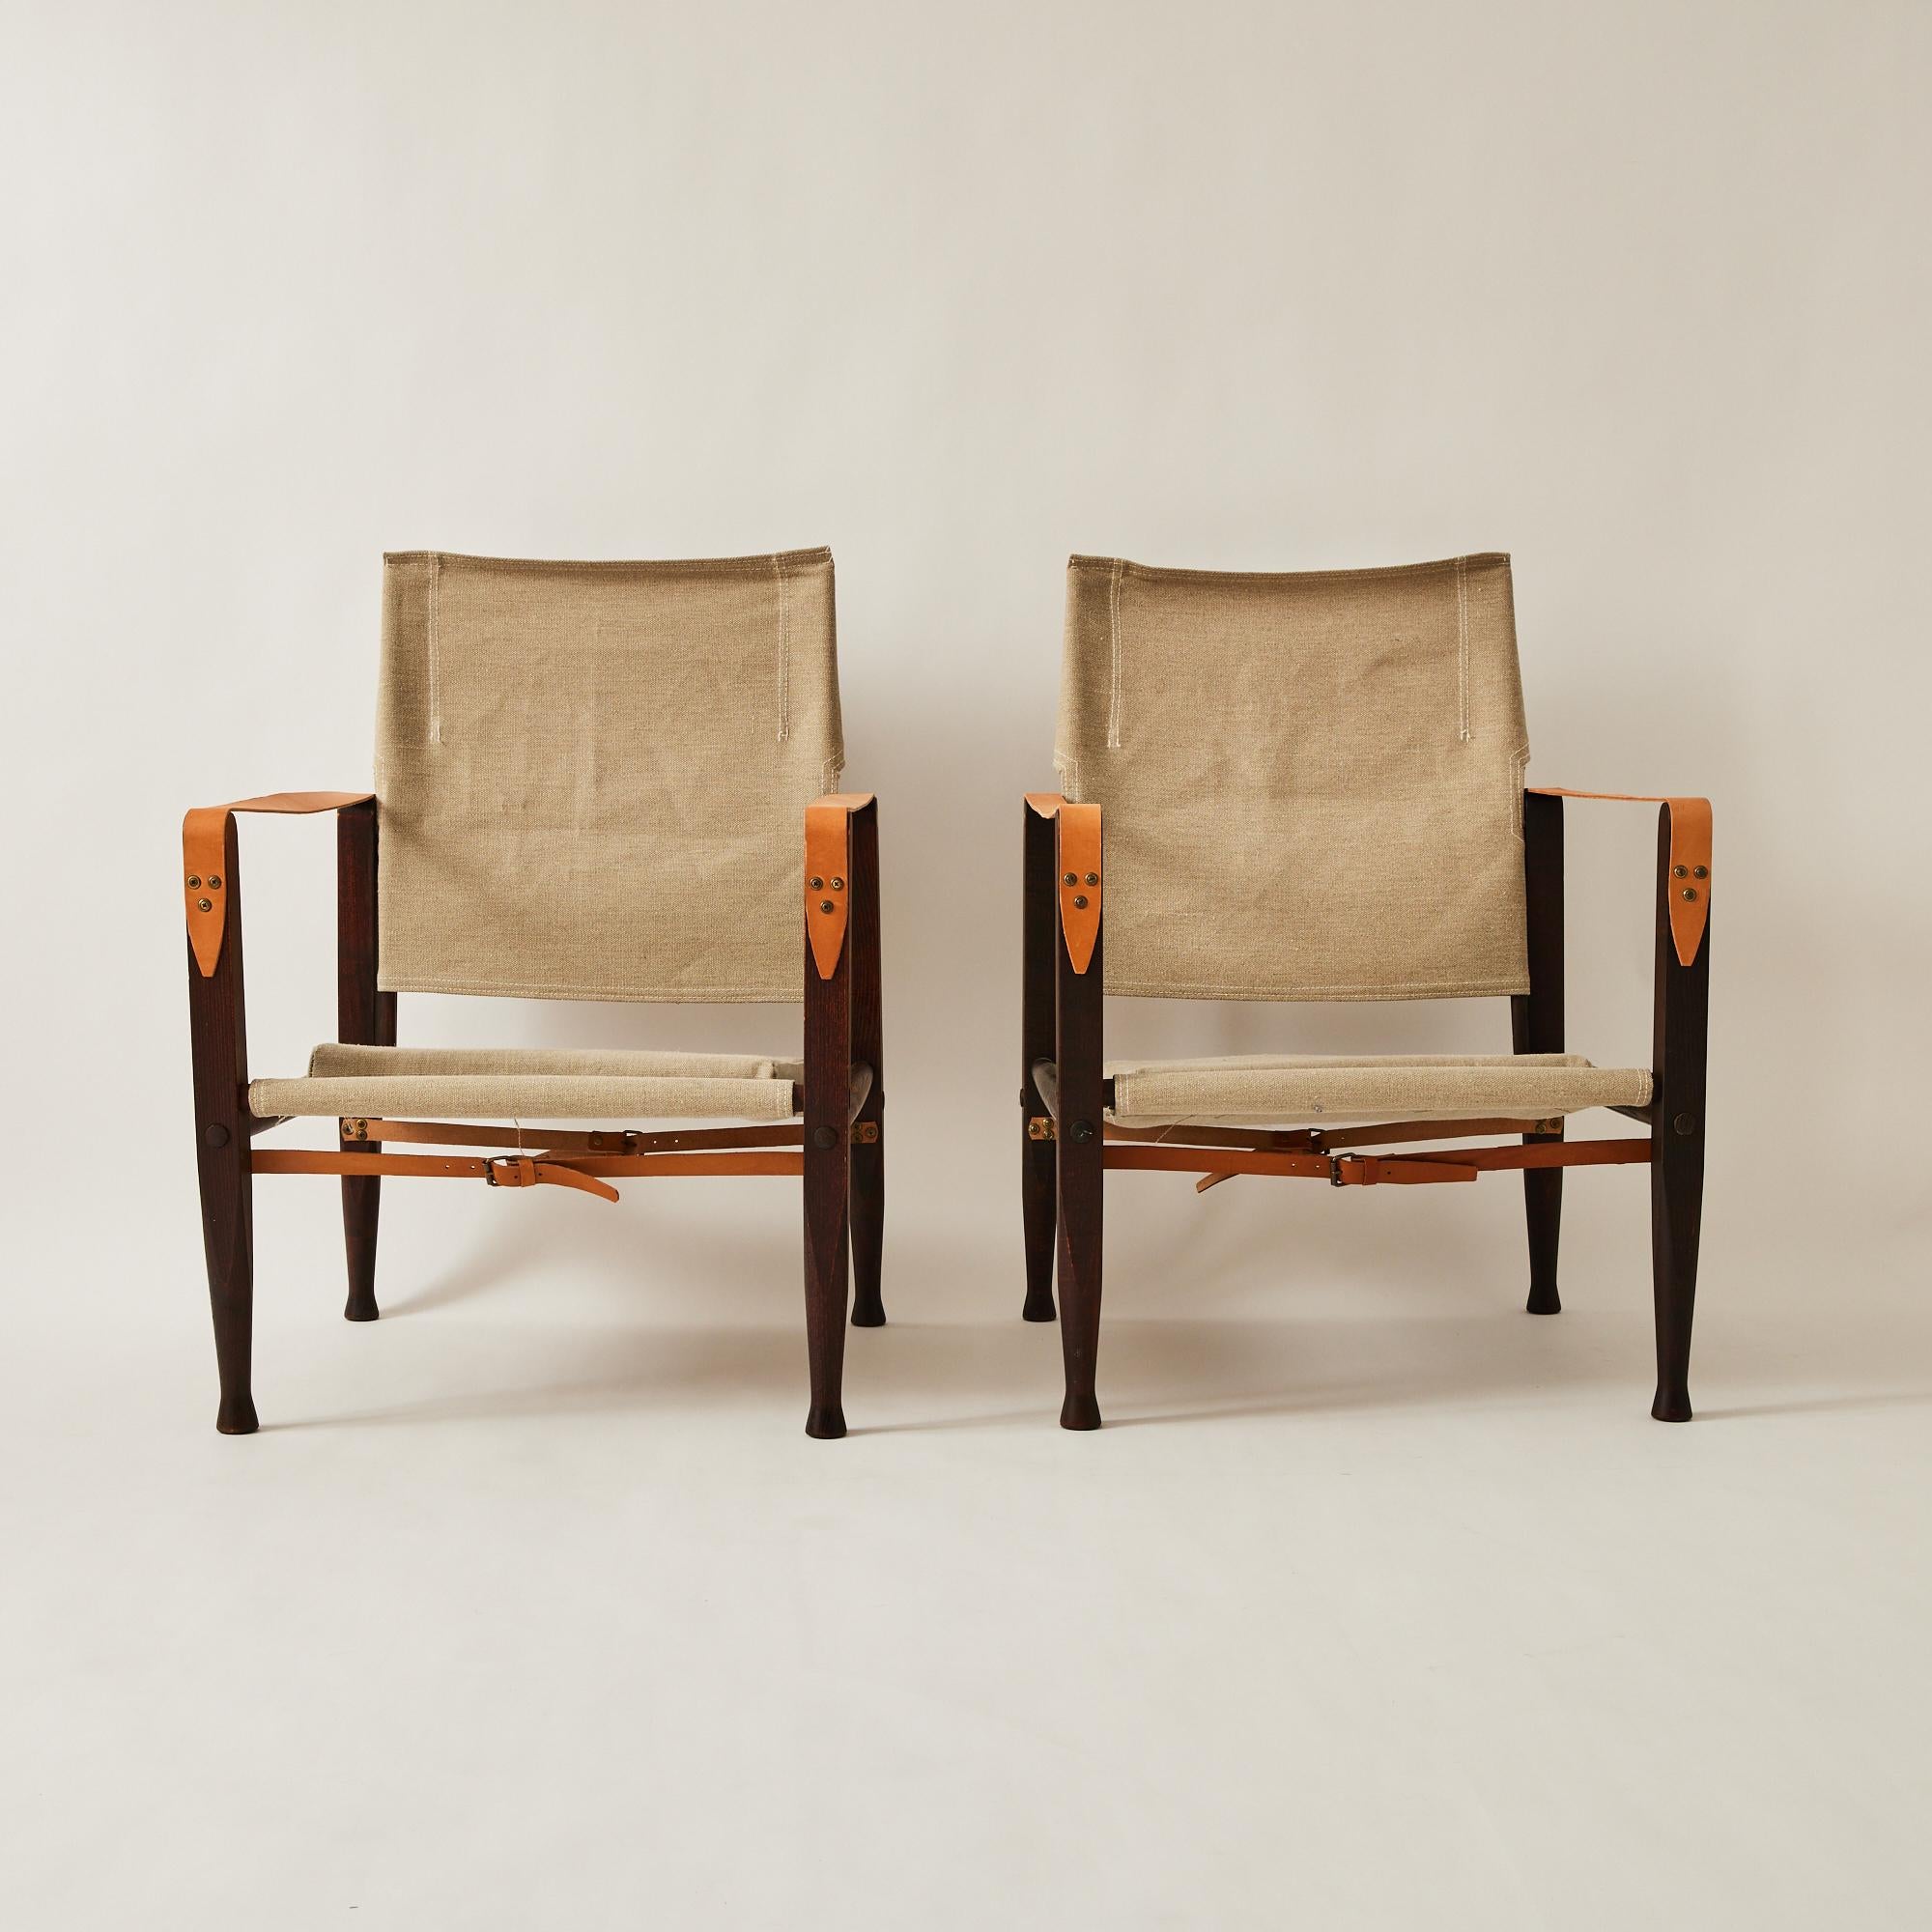 These Safari chairs were designed by Danish designer Kaare Klint who is known as the father of Danish modernism. They were designed in the 1930s and manufactured by Rud Rasmussen in the 1960's. Klint was inspired by images of the Roorkhee chair